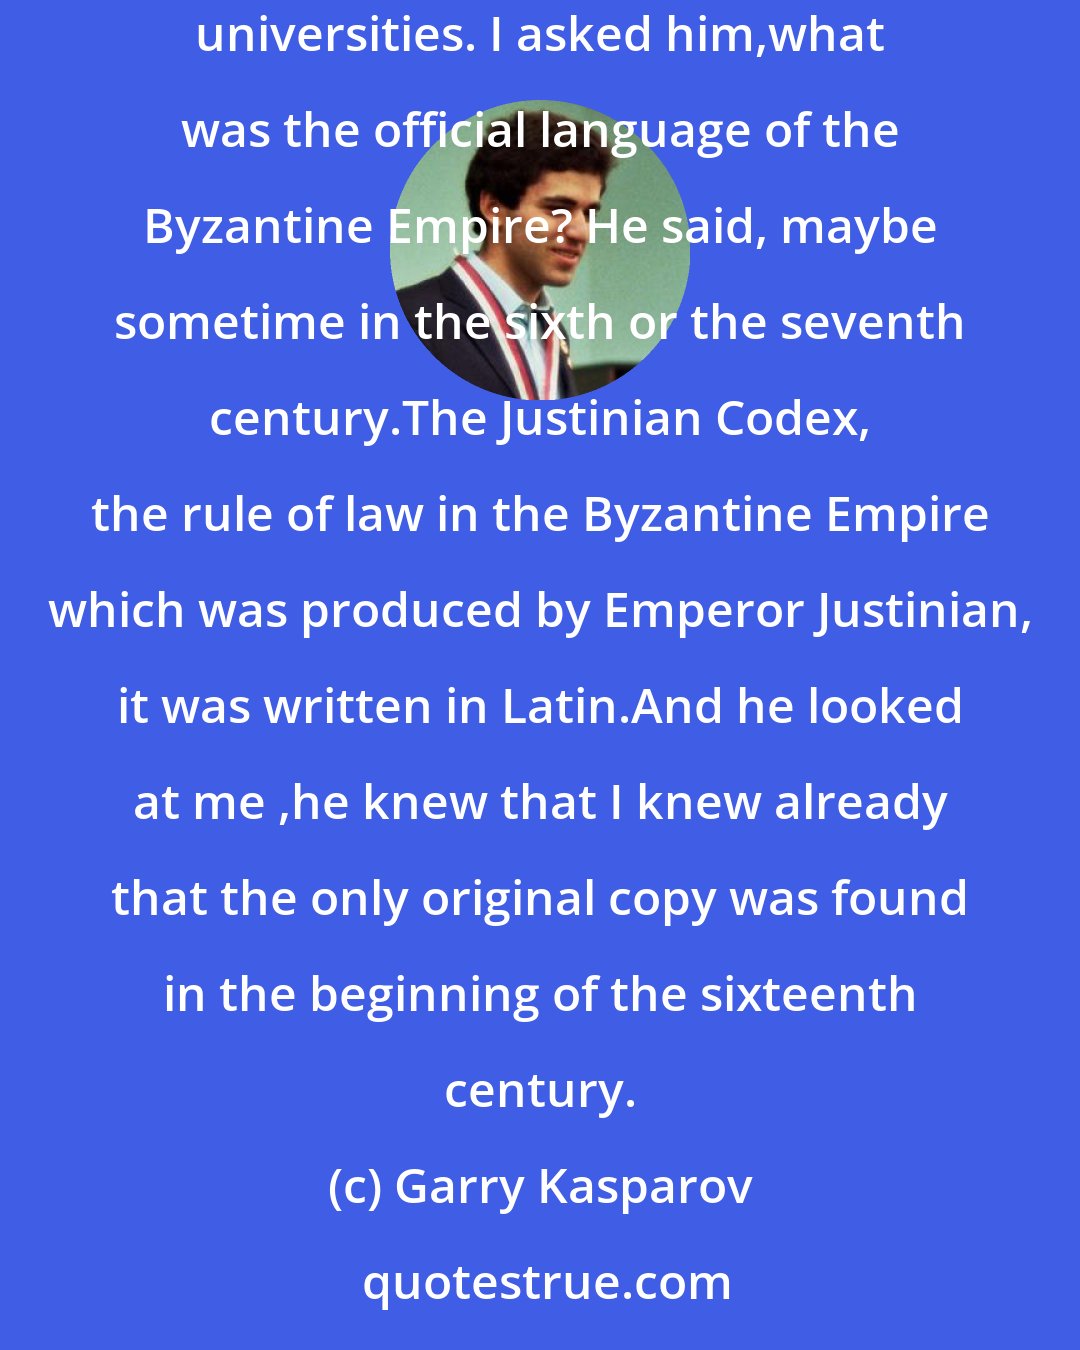 Garry Kasparov: Once I spoke about this subject among a group of English intellectuals. One of them was a professor on Roman Law at one of the leading British universities. I asked him,what was the official language of the Byzantine Empire? He said, maybe sometime in the sixth or the seventh century.The Justinian Codex, the rule of law in the Byzantine Empire which was produced by Emperor Justinian, it was written in Latin.And he looked at me ,he knew that I knew already that the only original copy was found in the beginning of the sixteenth century.